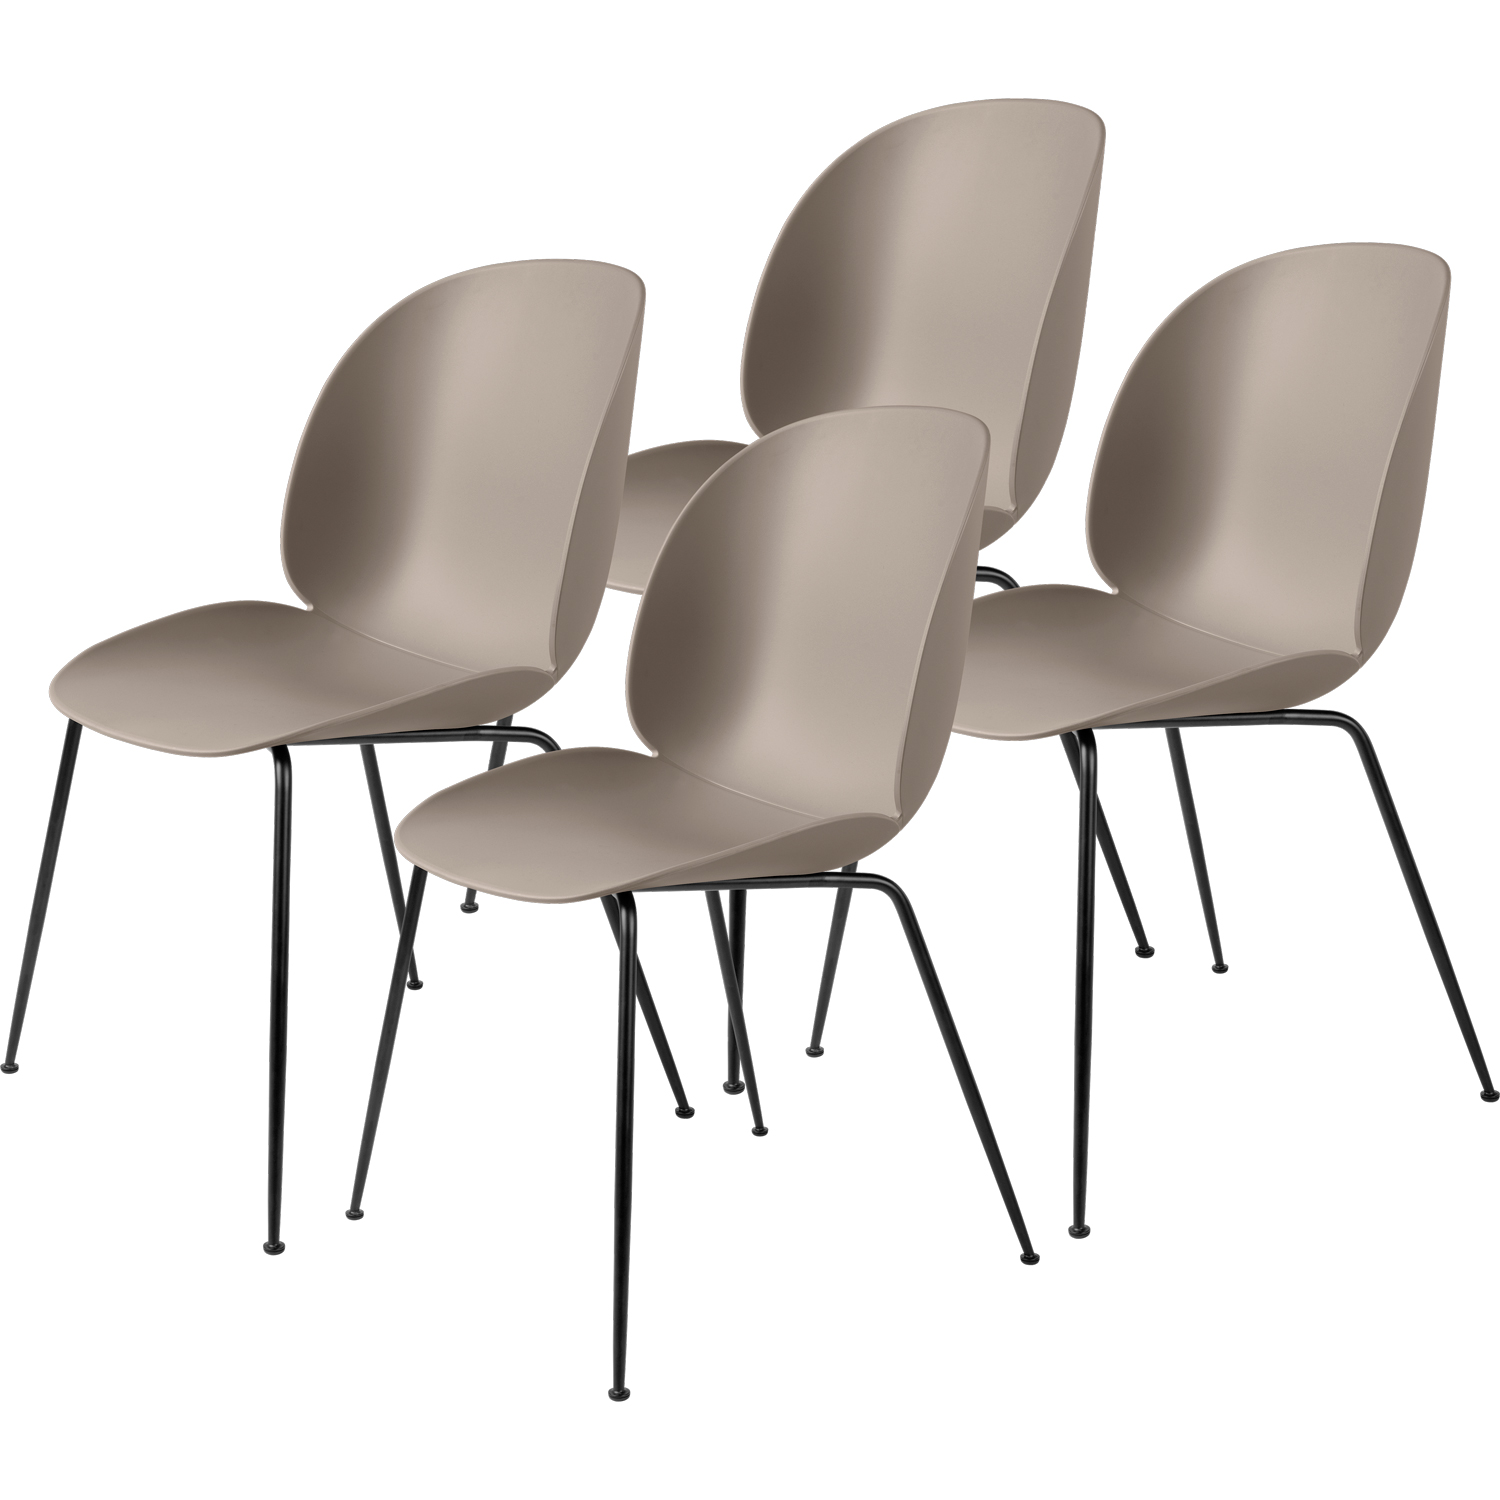 Beetle Dining Chair Unupholstered, Conic Base Black, Set Of 4, New ...